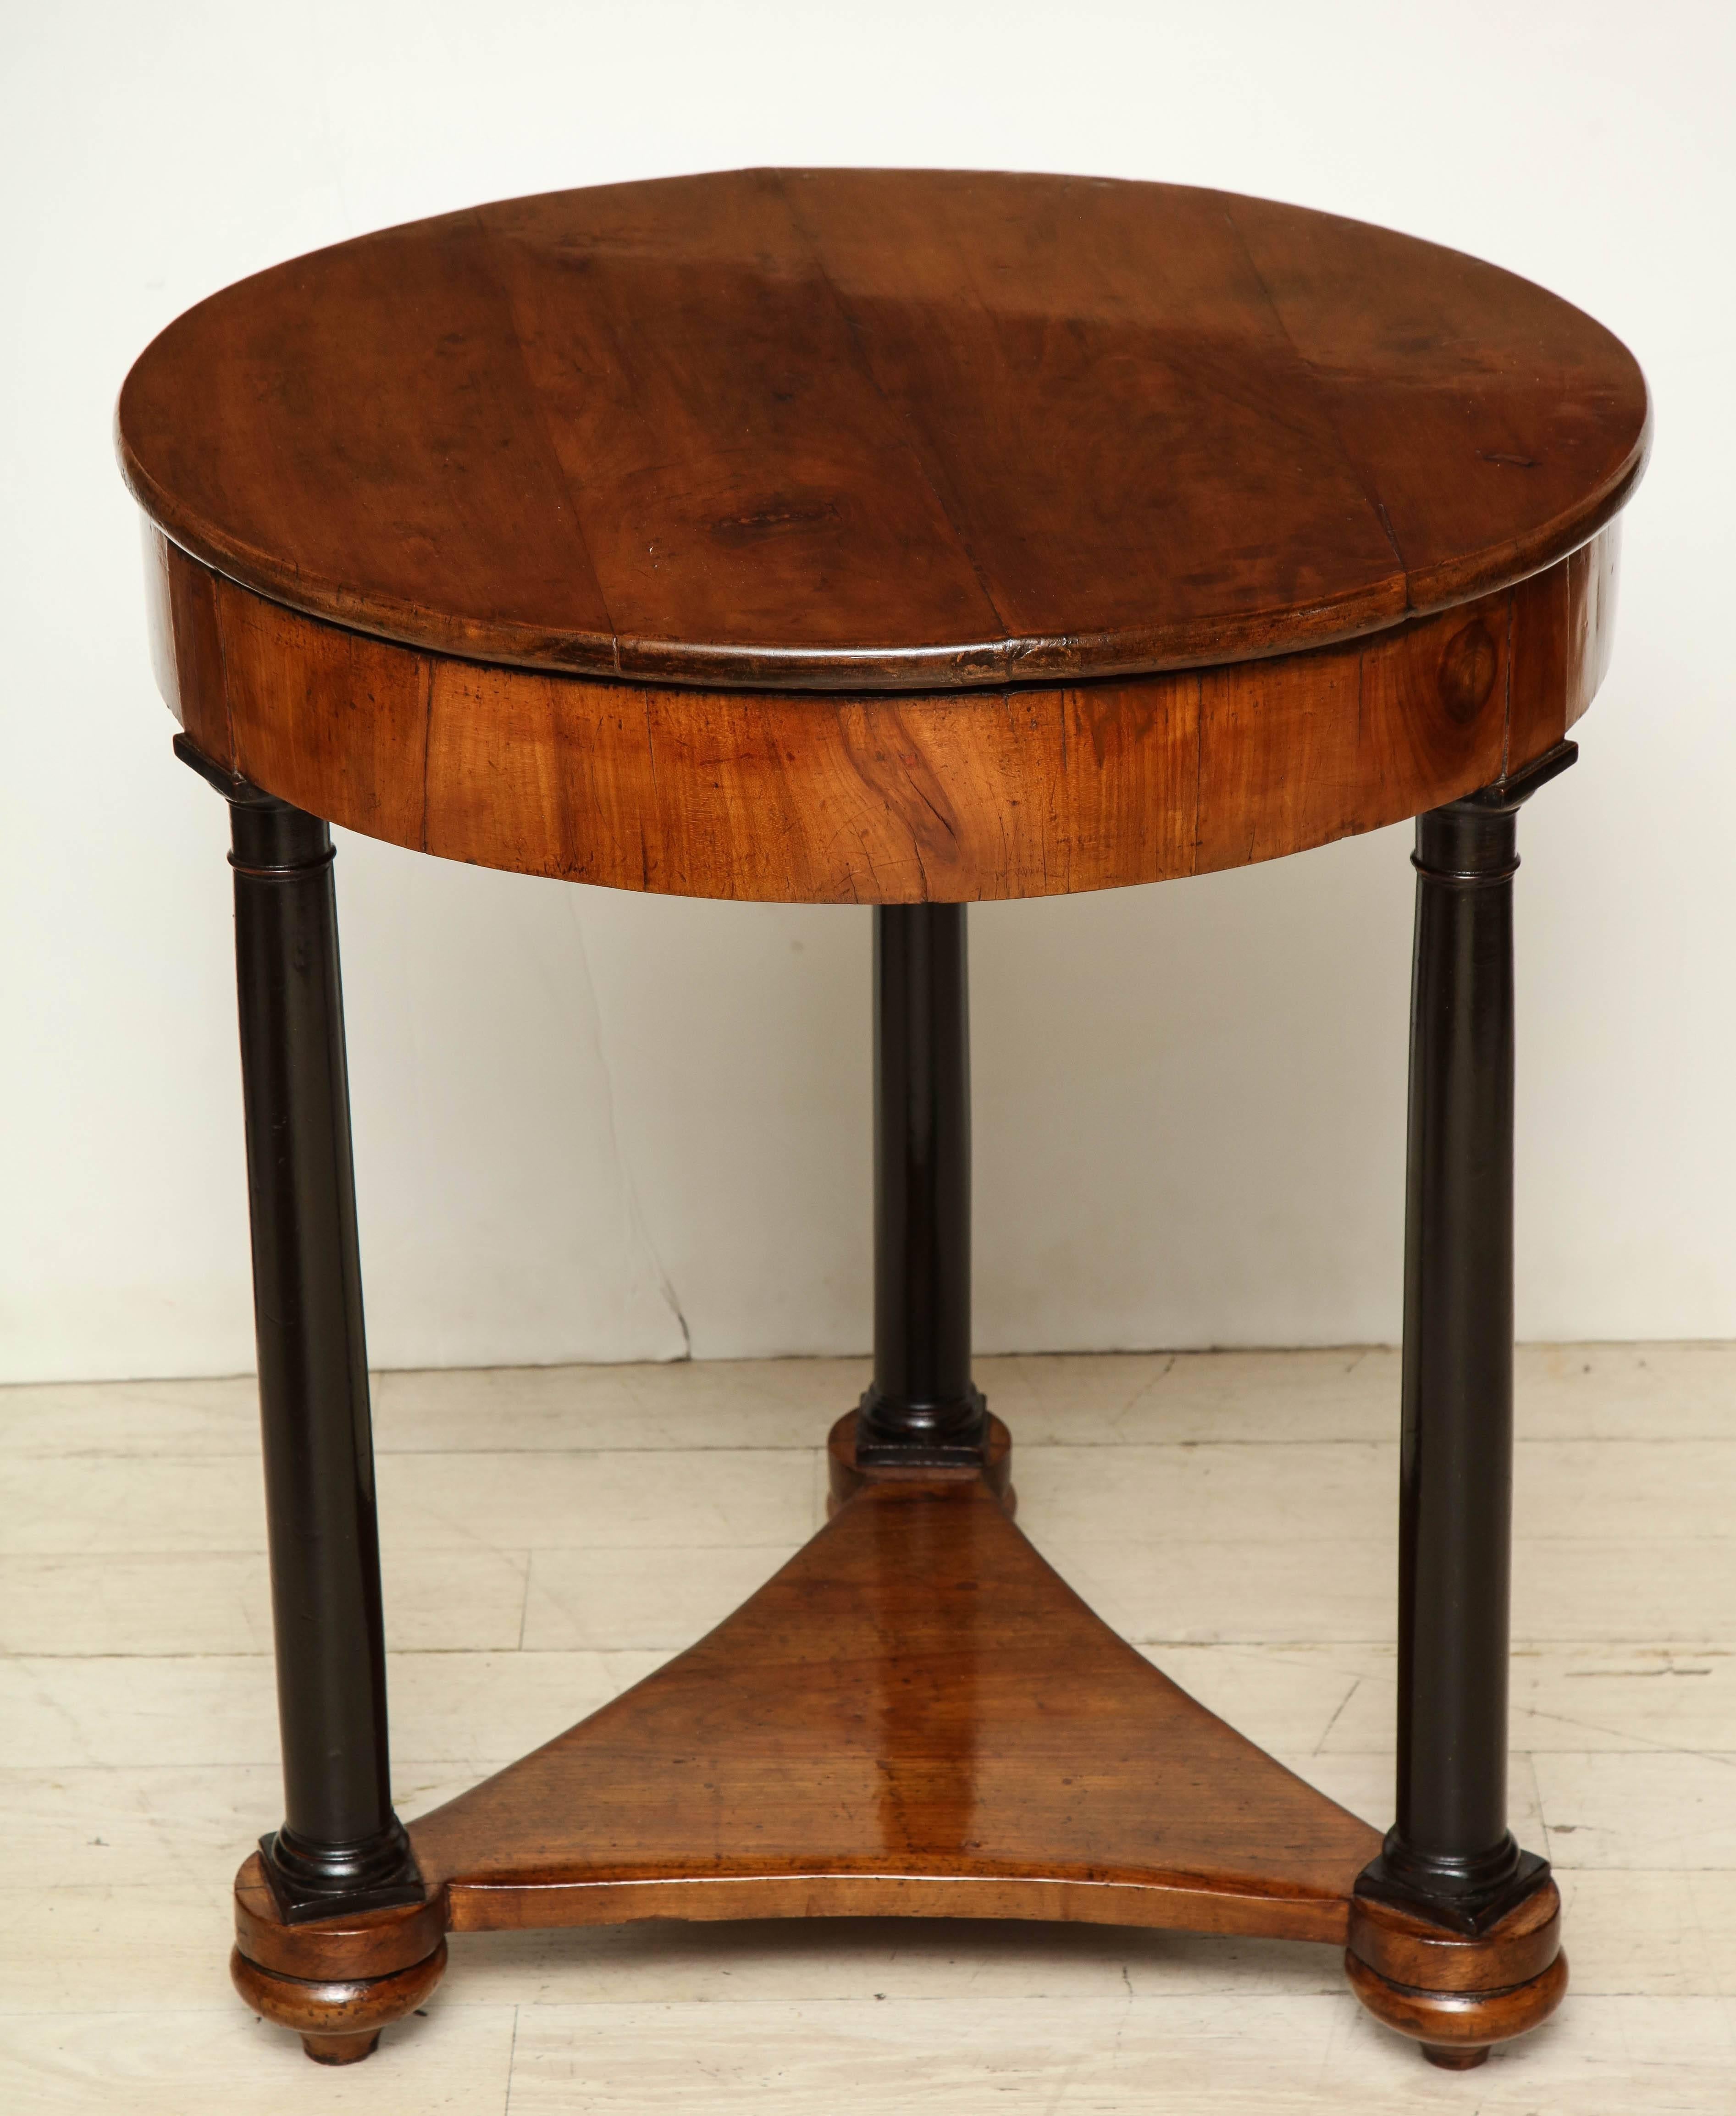 Early 19th-century circular cherry table with ebonized columnar supports and tripartite plinth base from the Veneto region. The hinged top opens to a 4 quadrant interior. Italy, circa 1810.